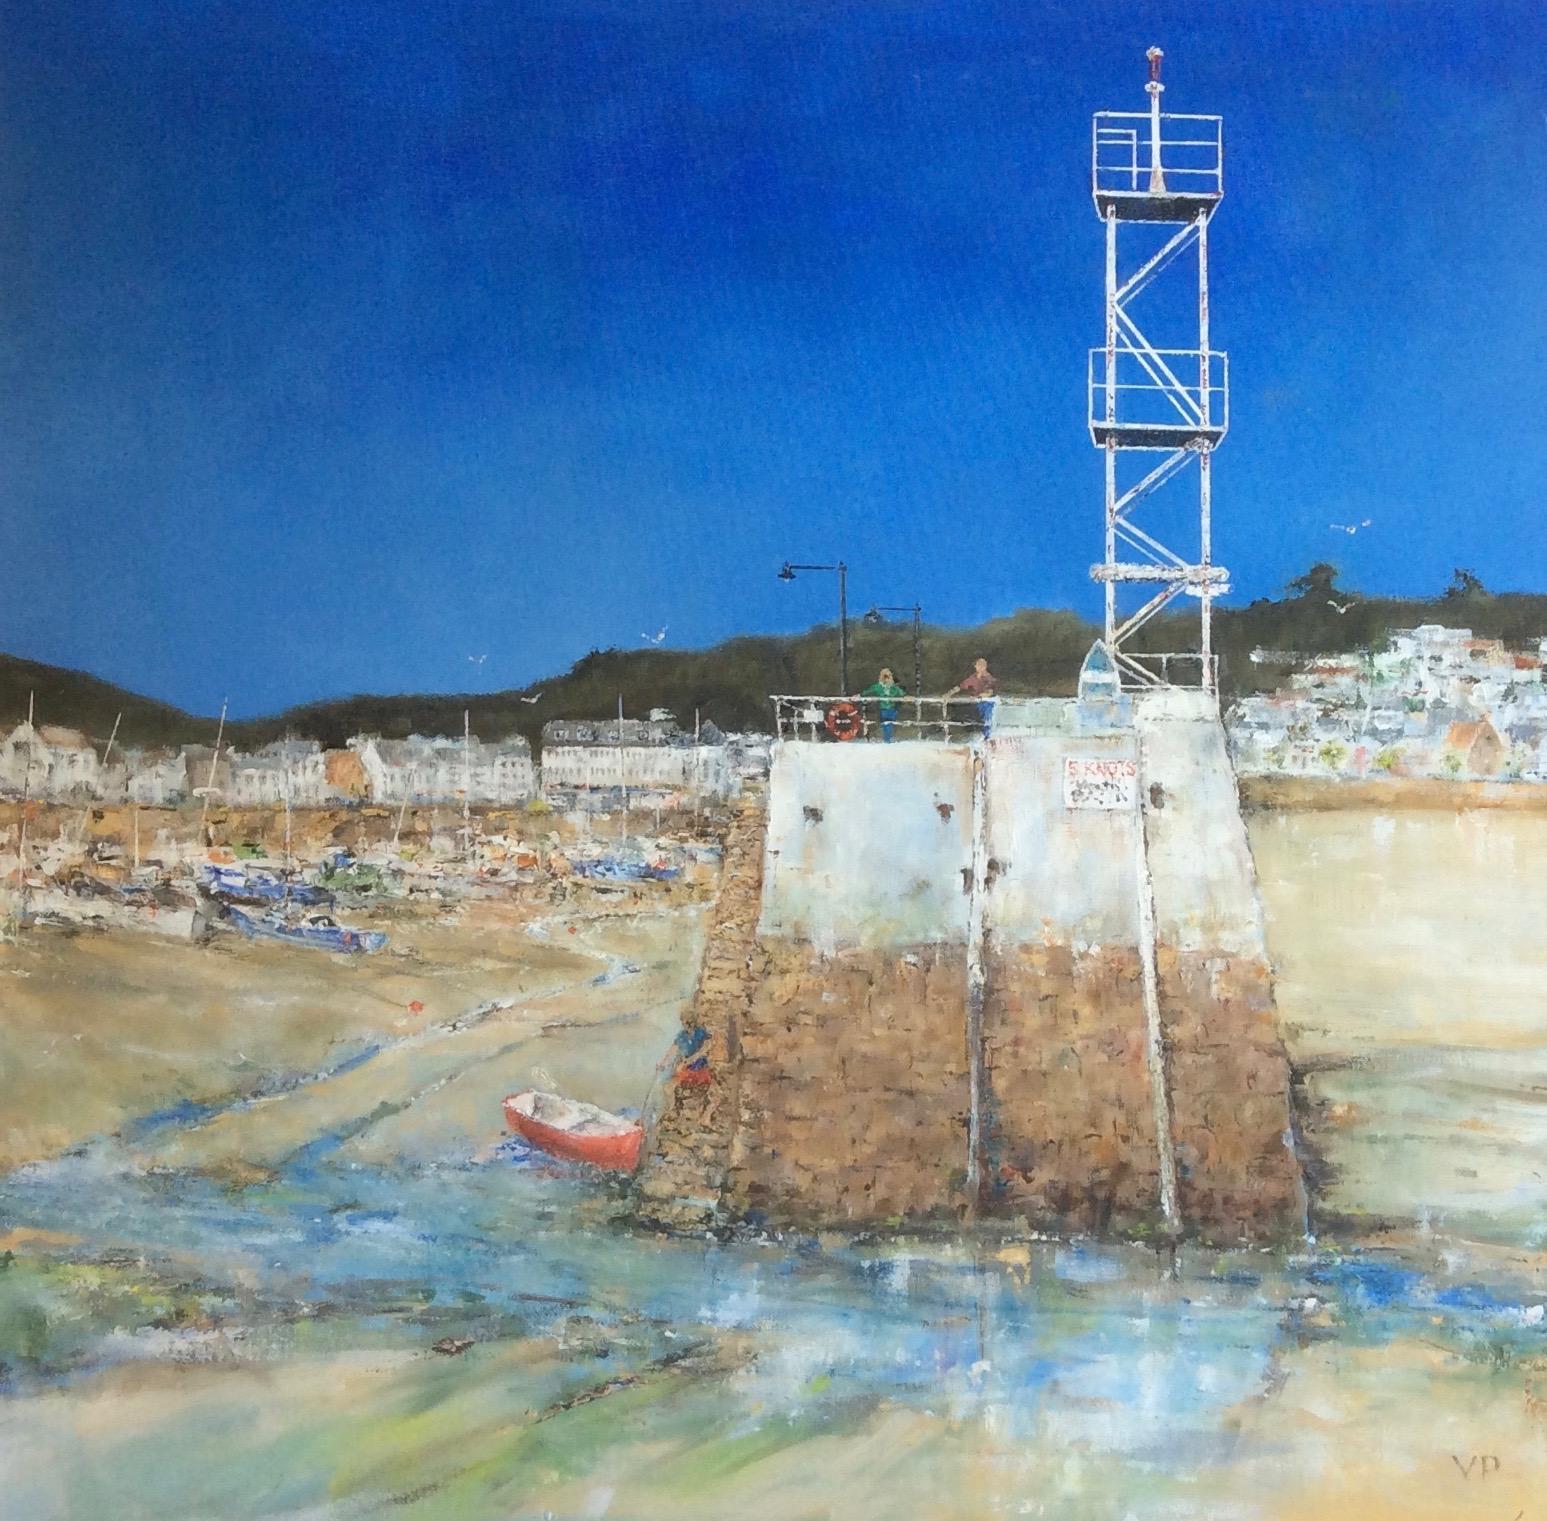 Vic Perron - 'The Red Dinghy' - St Aubin harbour mouth